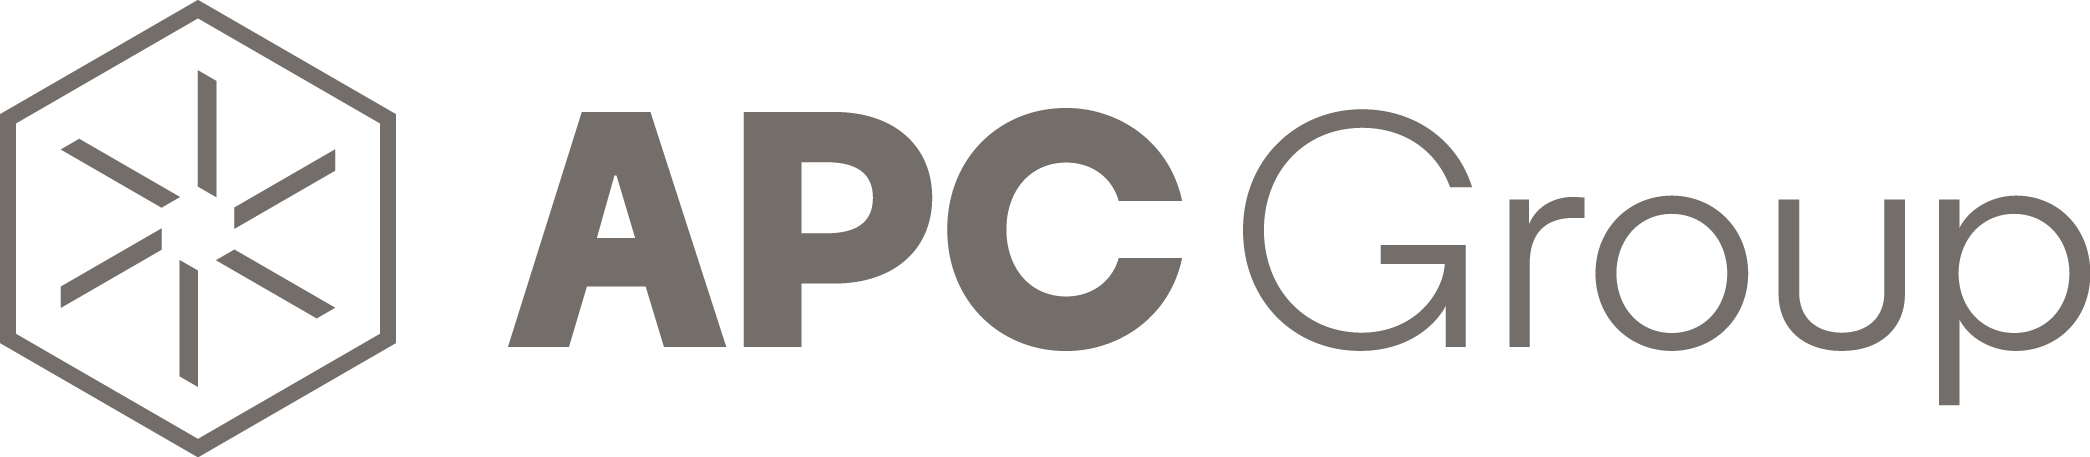 Apcer - Apcer, Transparent background PNG HD thumbnail